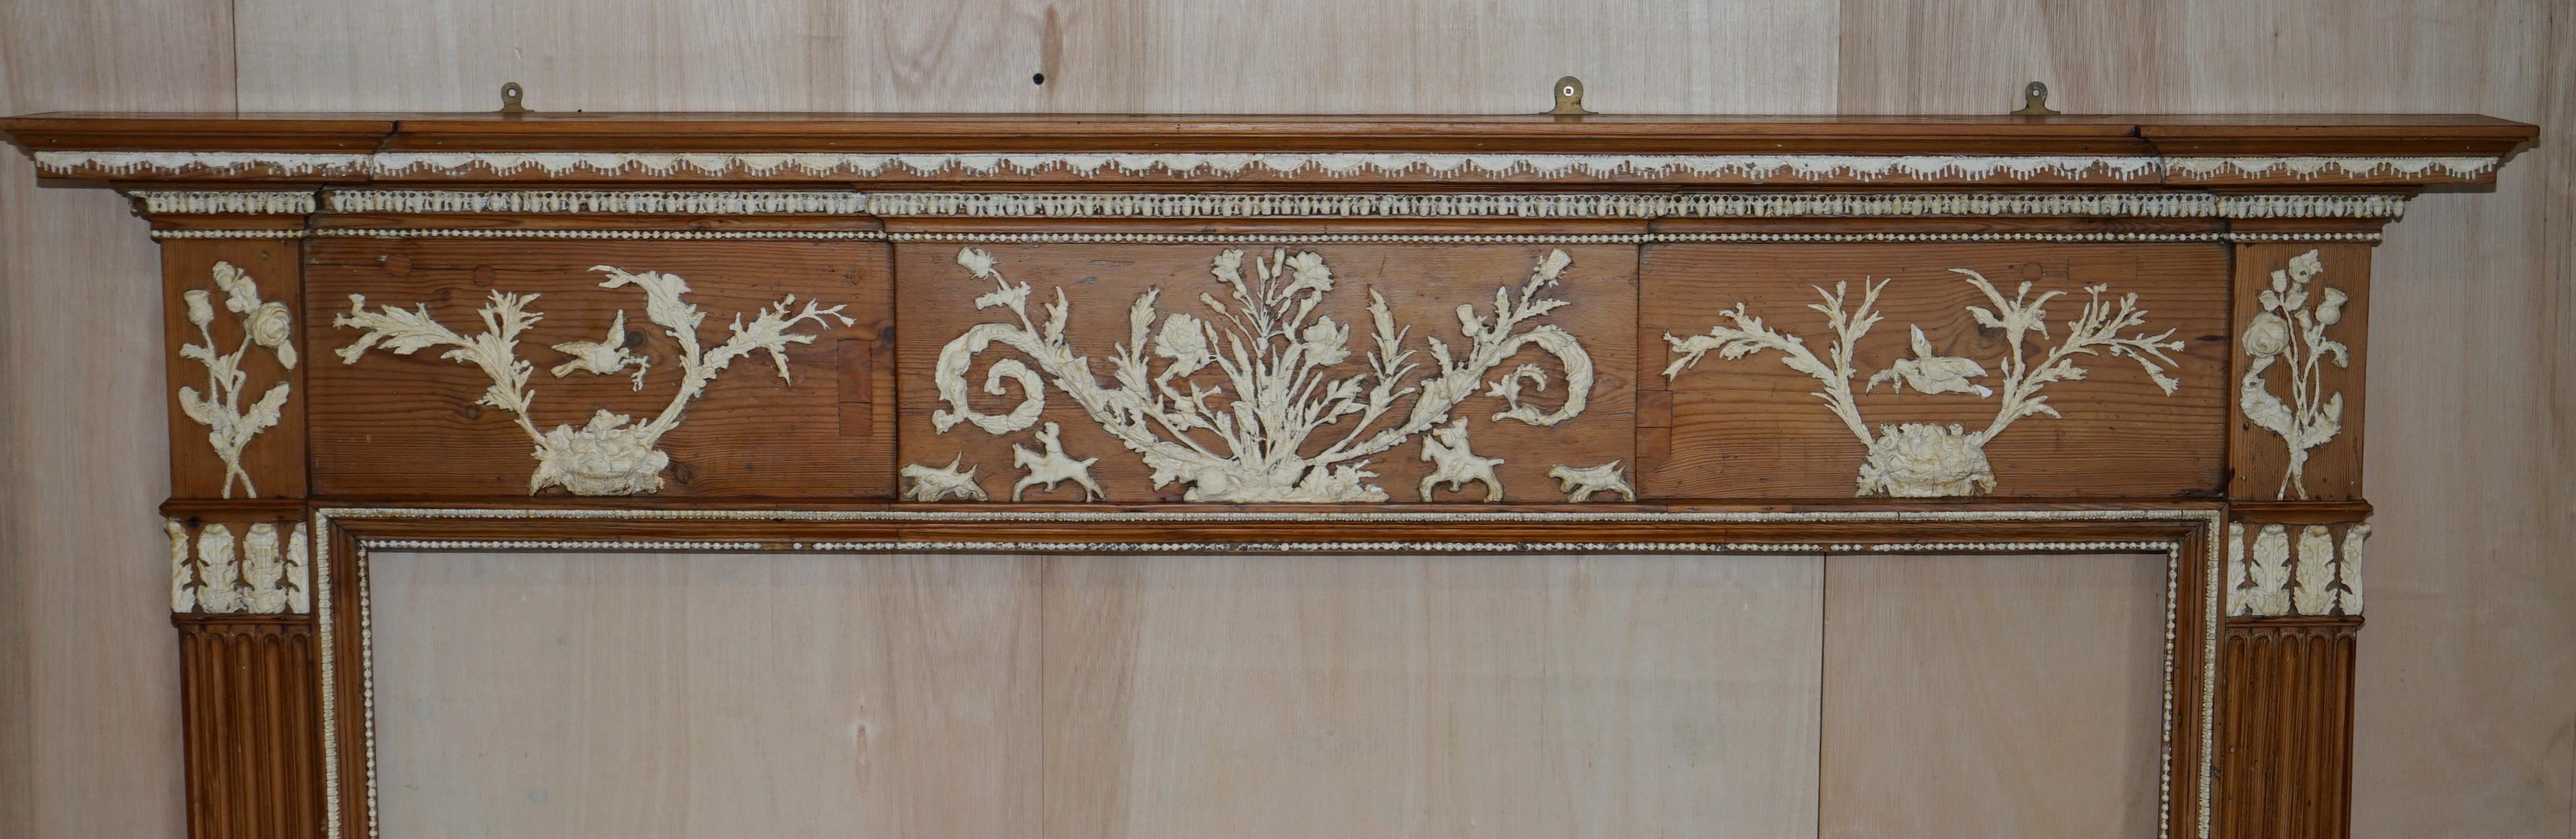 We are delighted to offer this lovely Victorian pitch pine & Gesso circa 1860 fire surround

A very good looking and highly decorative fire surround, the gesso plaster detailing is exquisite, there seems to be a chap riding a horse, some pigs or